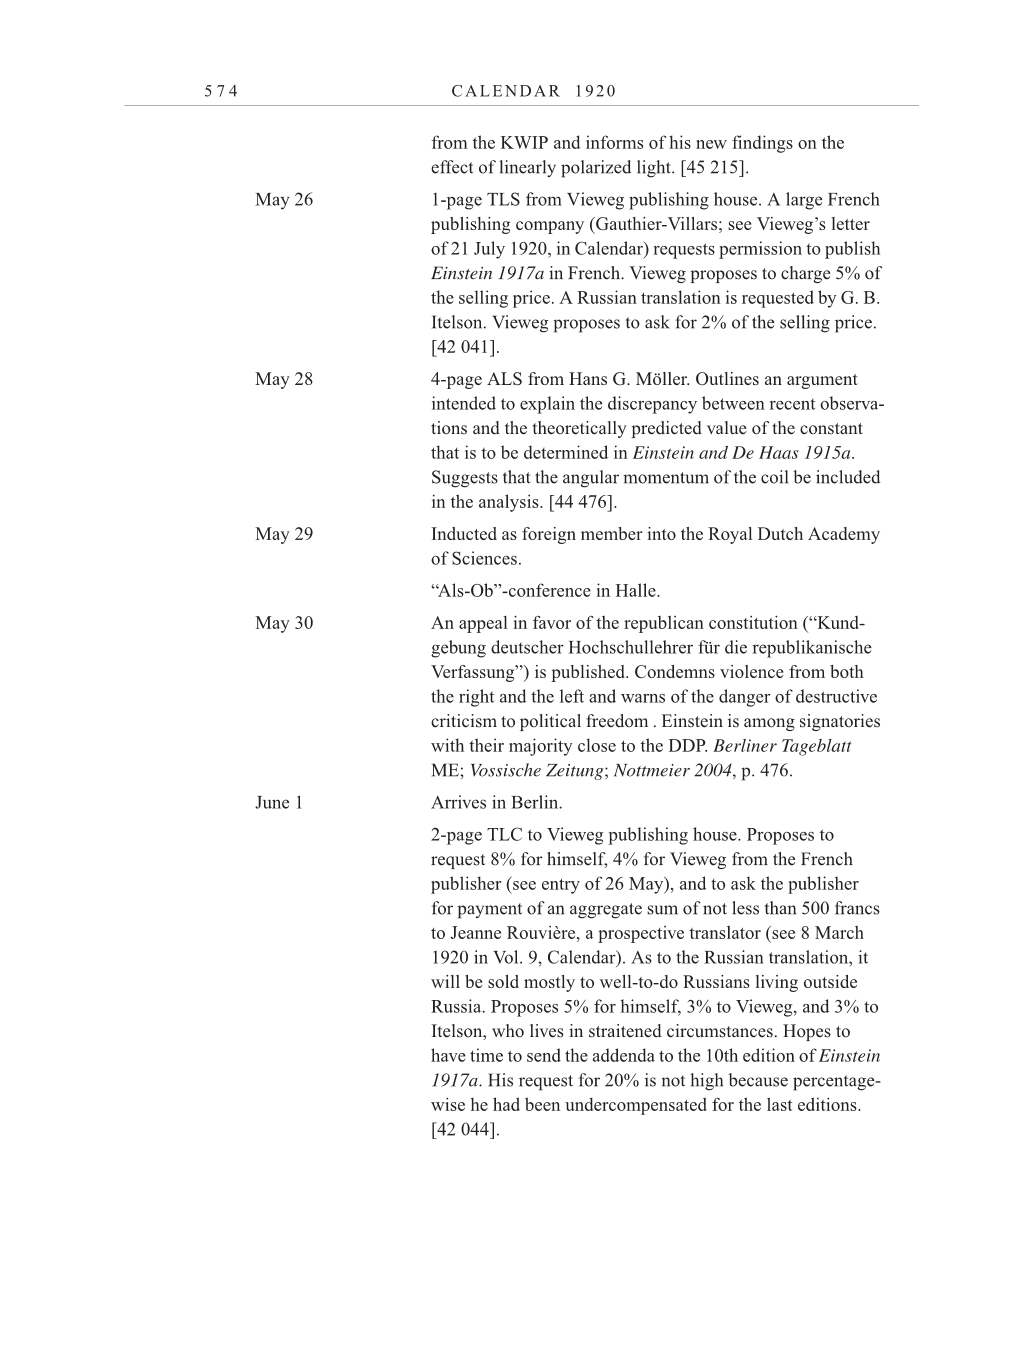 Volume 10: The Berlin Years: Correspondence May-December 1920 / Supplementary Correspondence 1909-1920 page 574